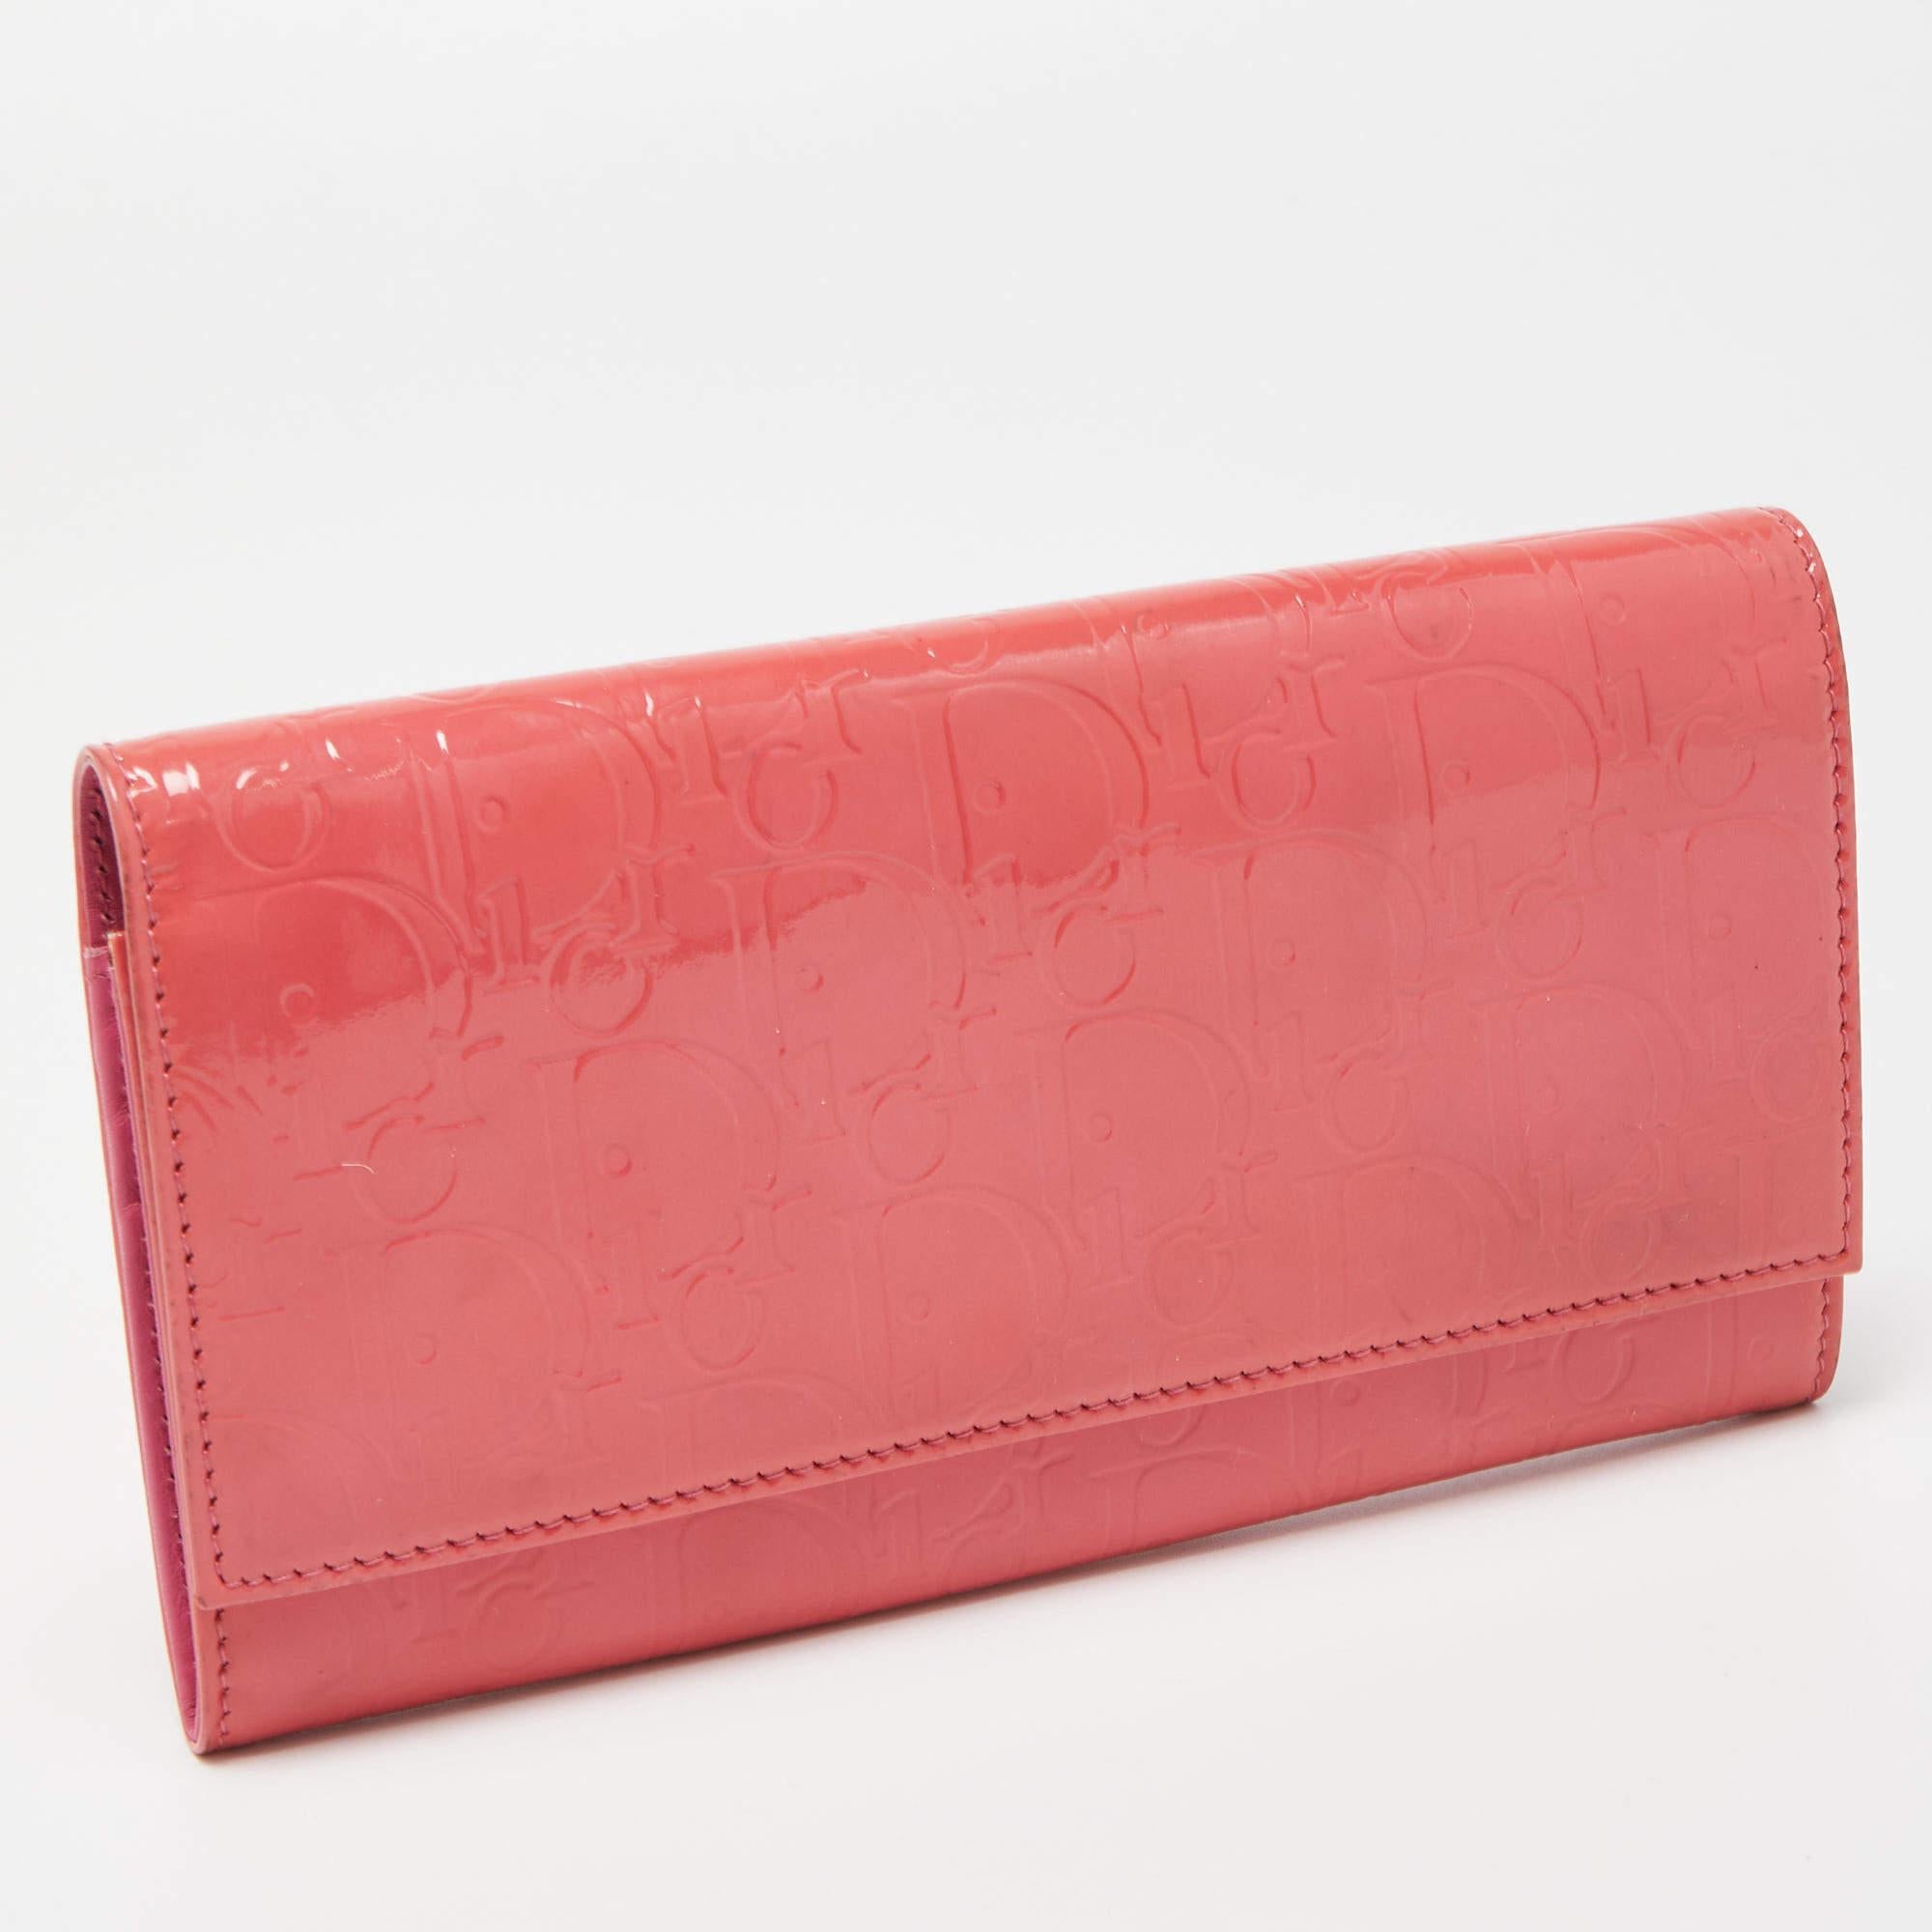 Dior Pink Oblique Embossed Patent Leather Continental Wallet In Good Condition For Sale In Dubai, Al Qouz 2